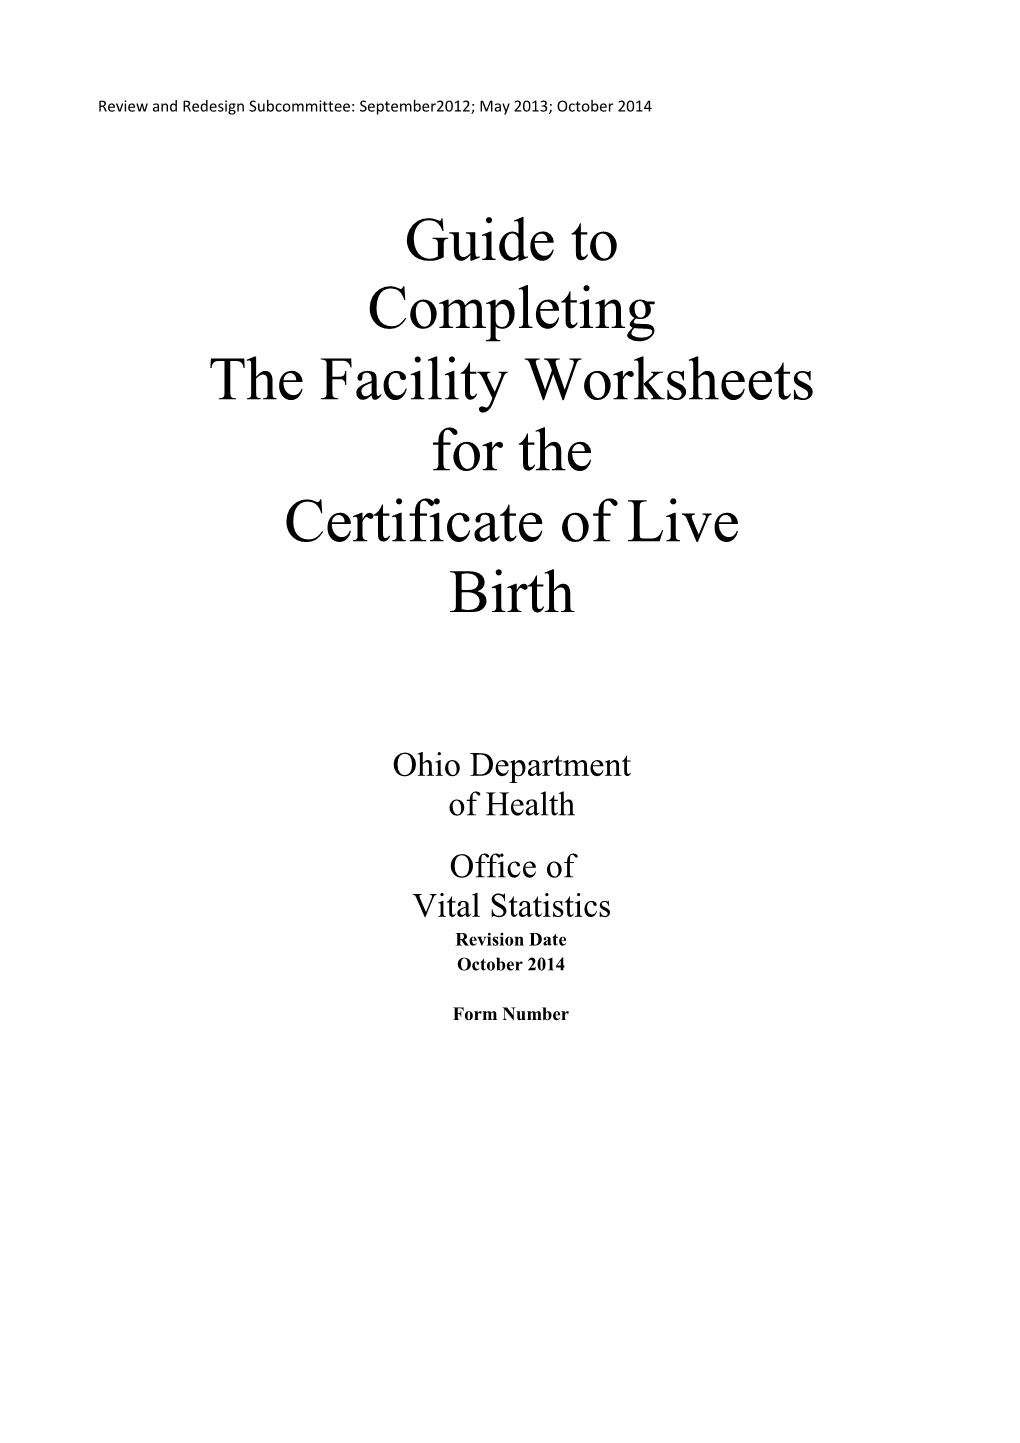 NCHS Guide To Completing Facility Worksheets